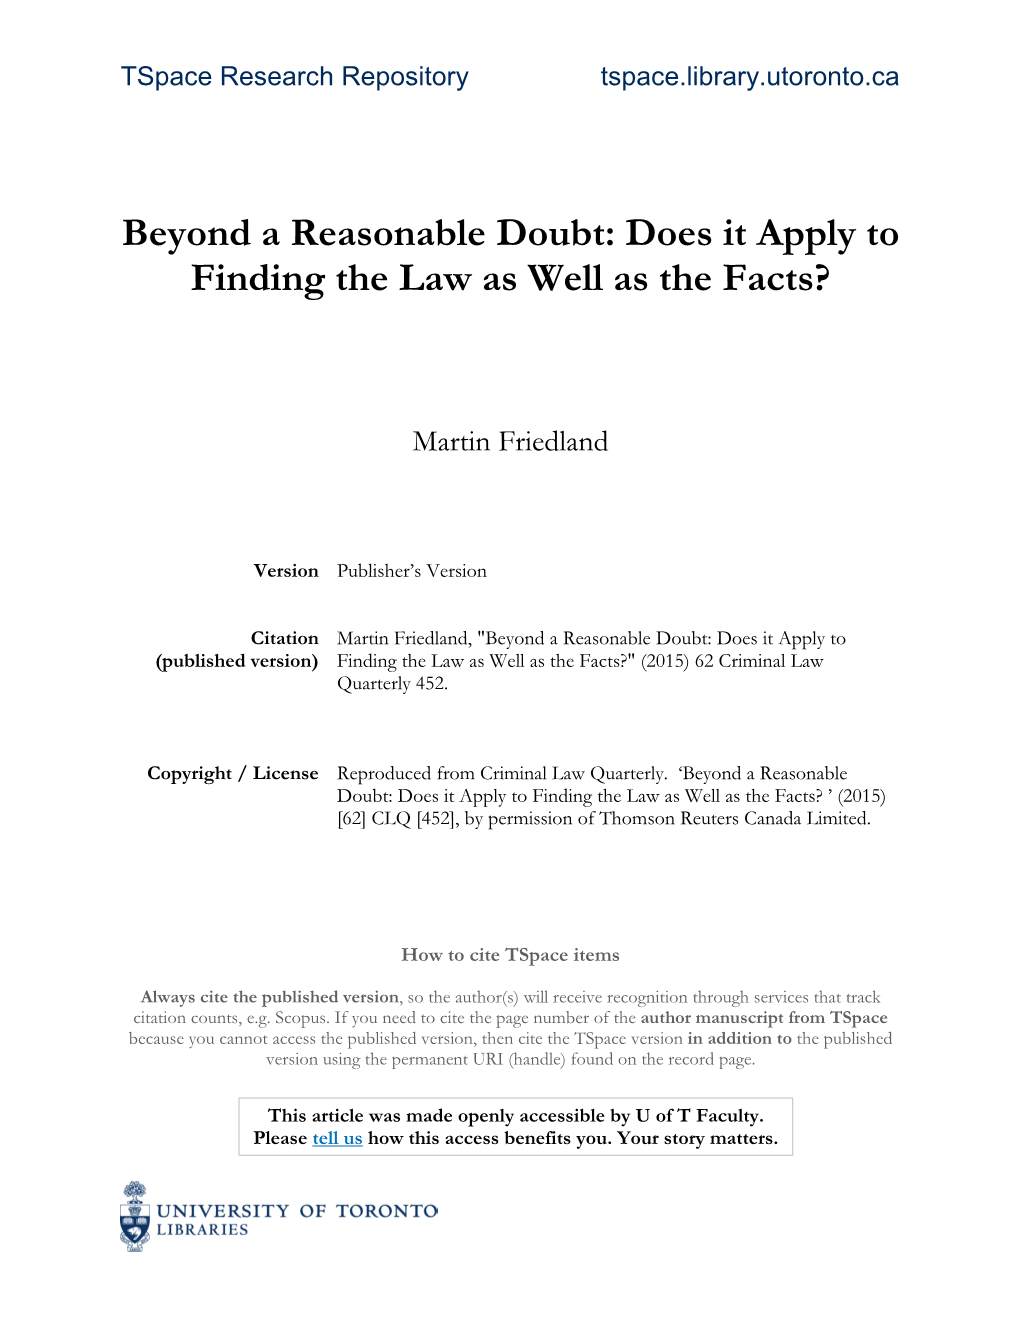 Beyond a Reasonable Doubt: Does It Apply to Finding the Law As Well As the Facts?